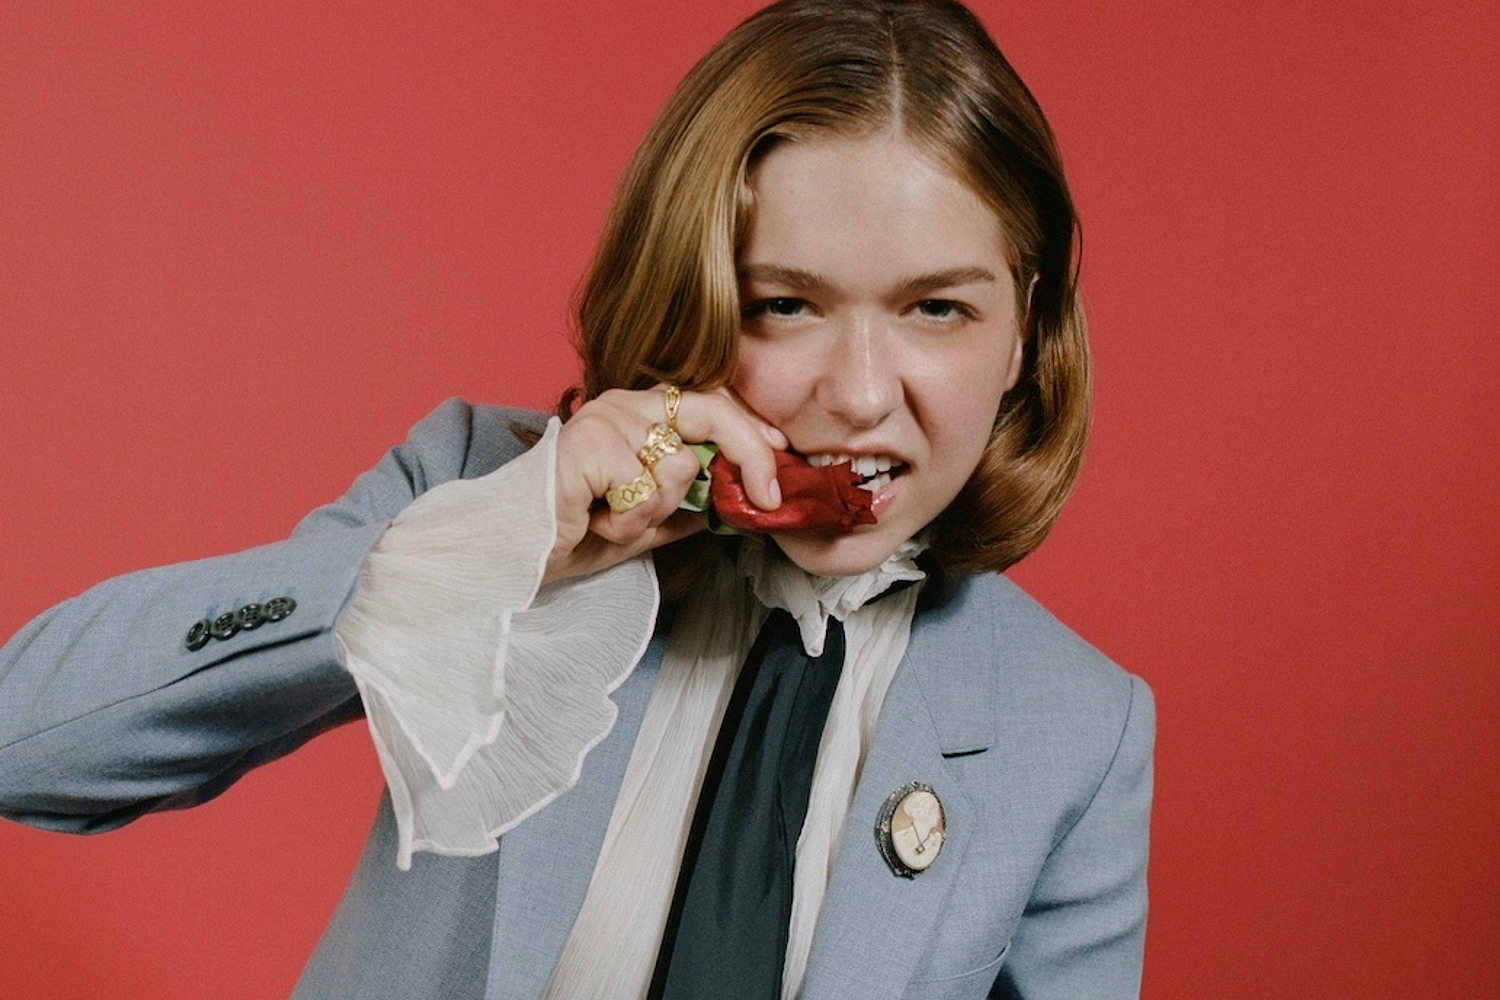 Snail Mail releases new track ‘Ben Franklin’